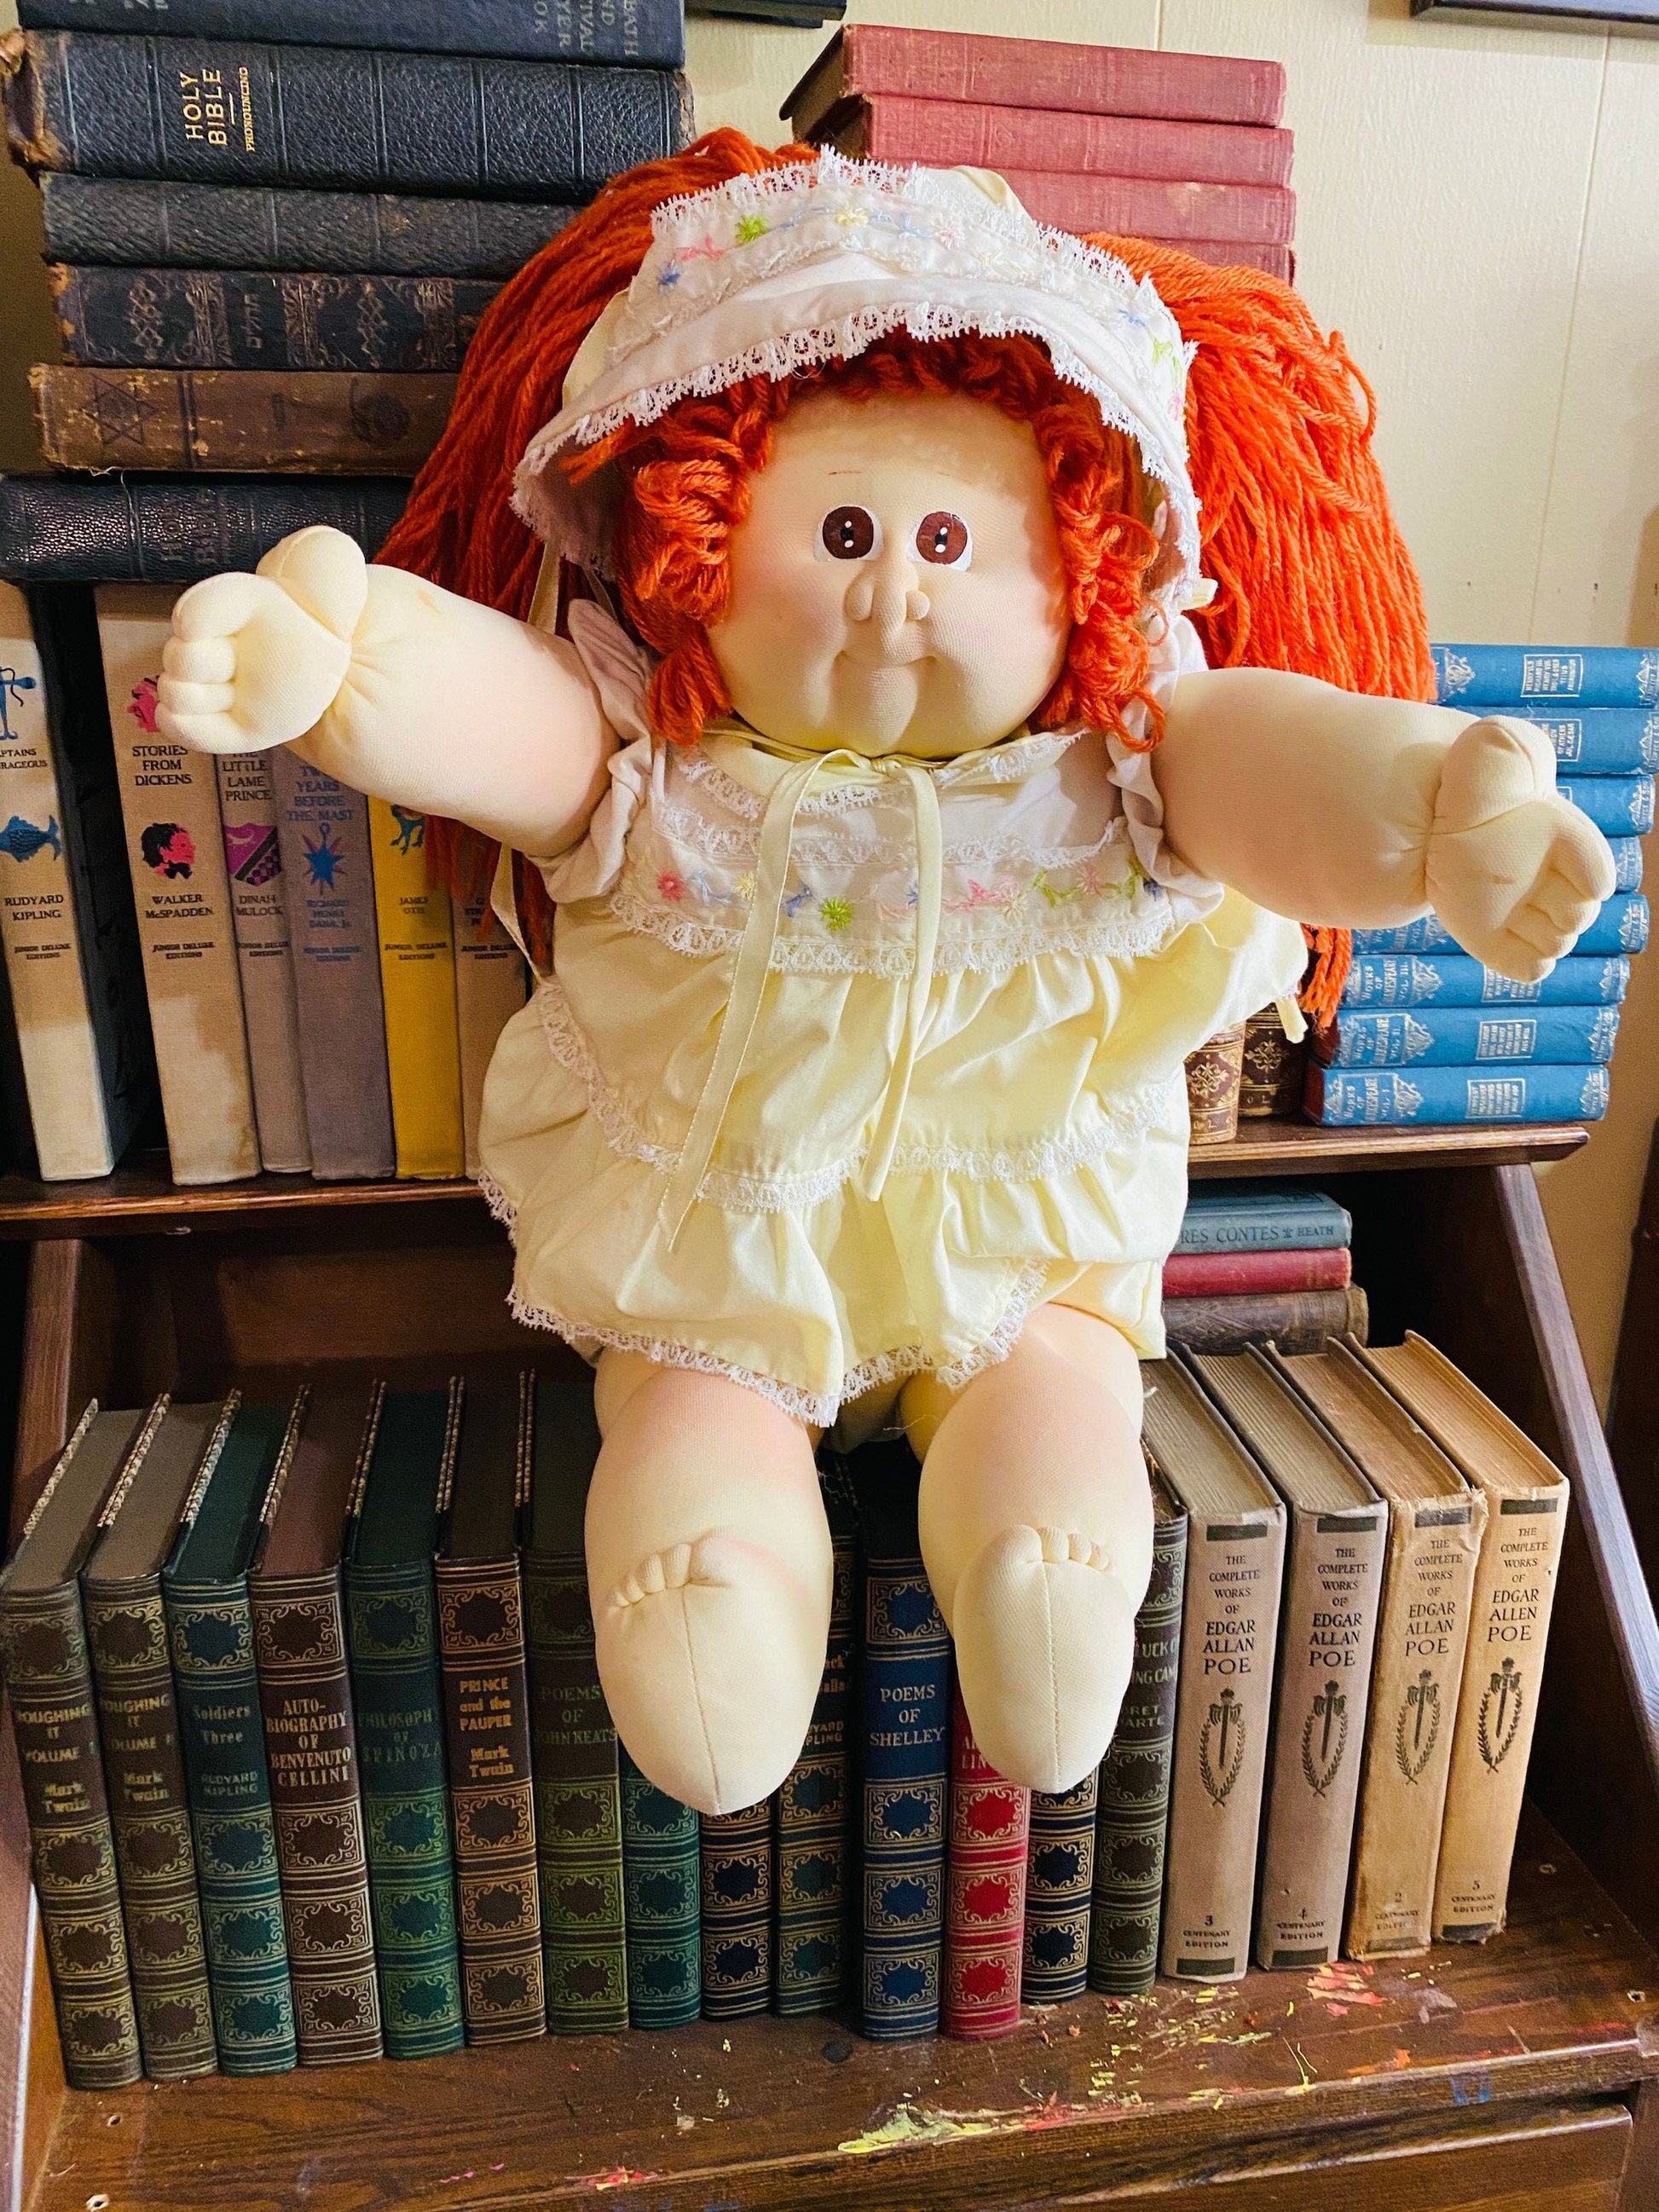 Little People Xavier Roberts Signed Vintage Cabbage Patch Soft Sculpture 1983 Vintage doll Red hair pigtails CPK brown eyes RARE collectible